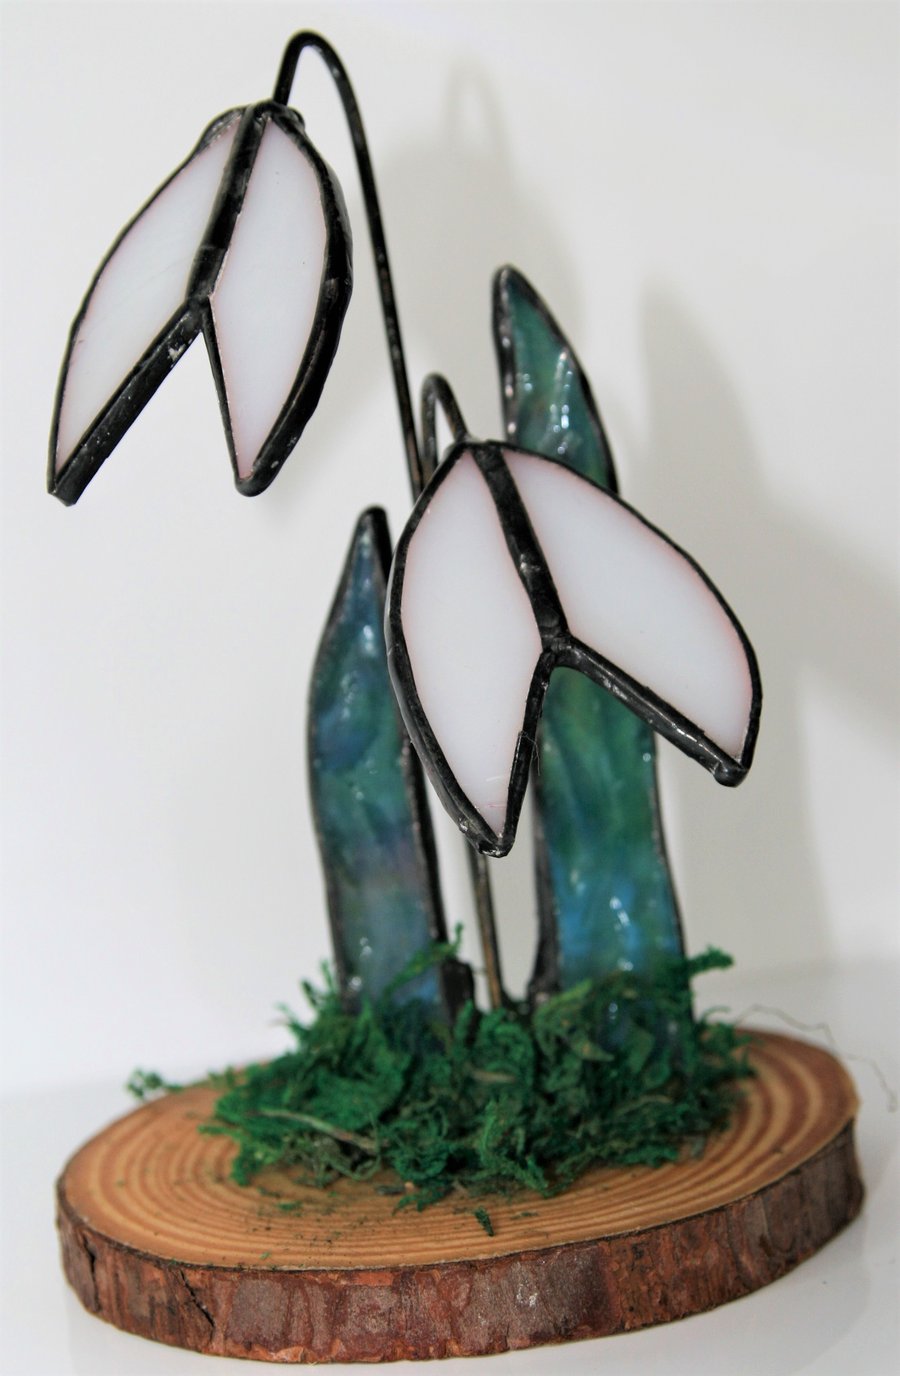 Handmade stained glass snowdrop 